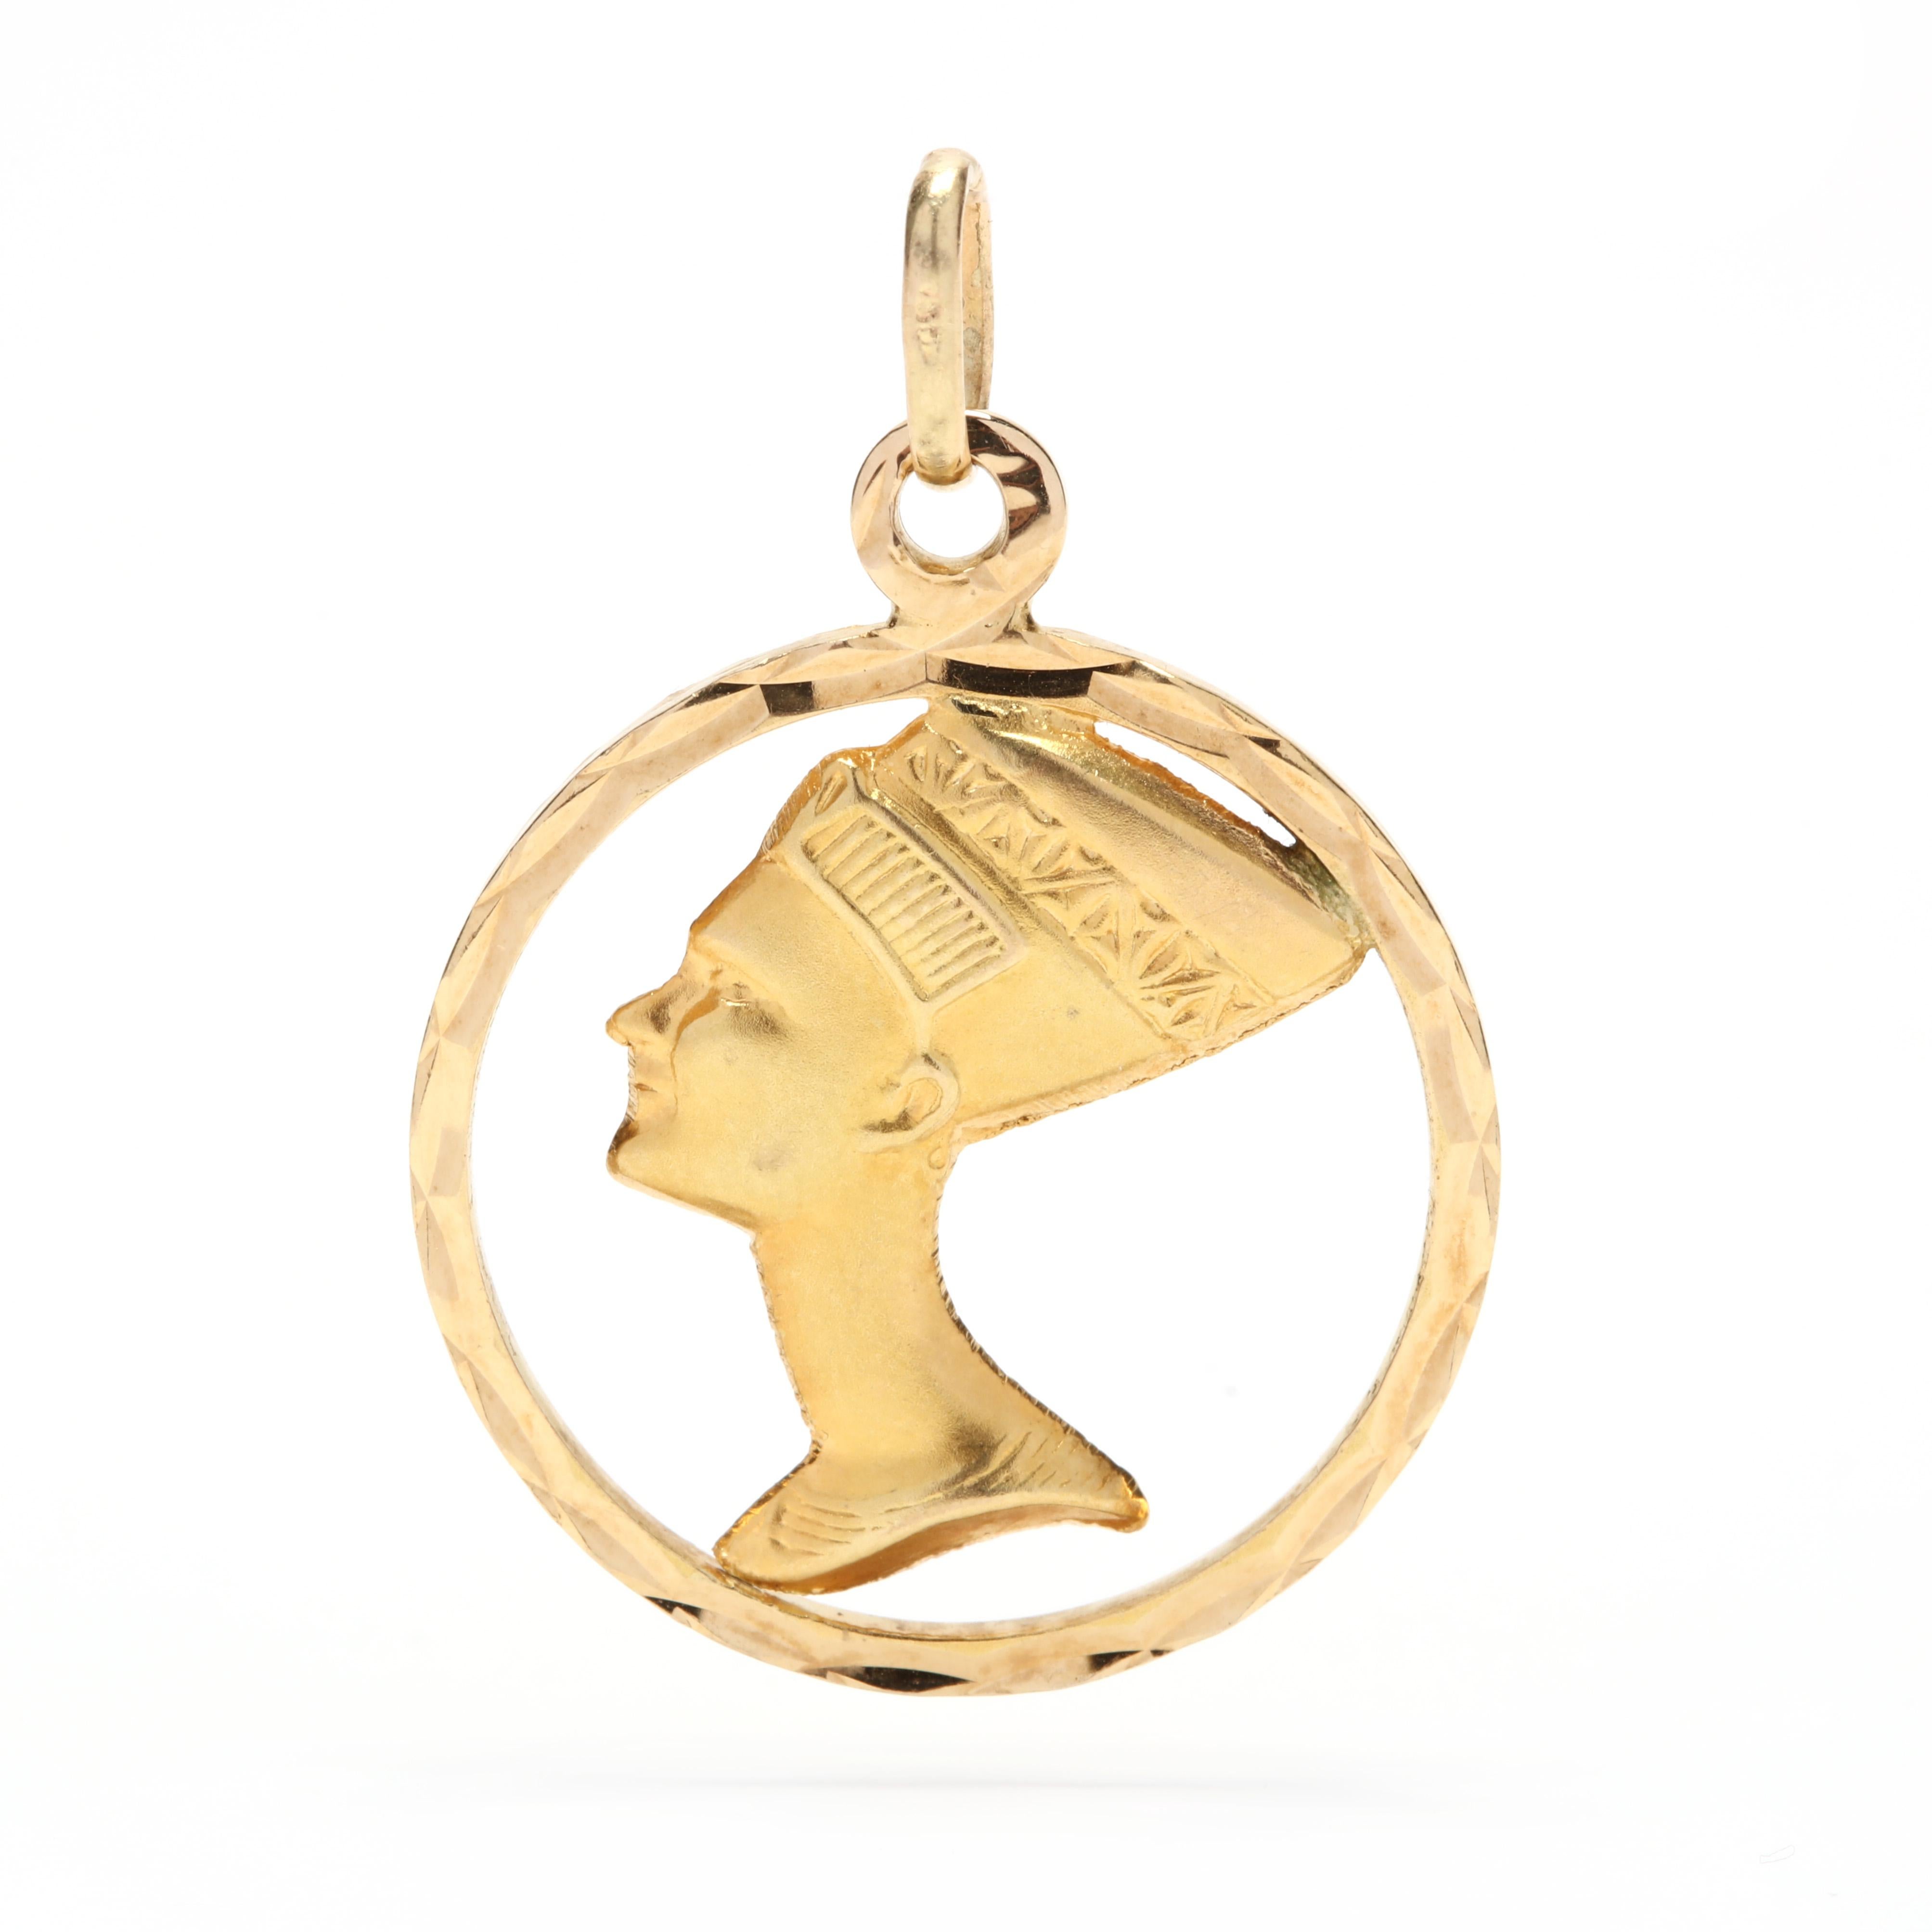 An 18 karat yellow gold Pharaoh Nefertiti round charm / pendant. This pendant features a faceted circle with a Pharaoh Nefertiti motif in the center.

Length: 1.25 in.

Width: 1 in.

2.54 dwts.

* Please note that this is a vintage item and may show